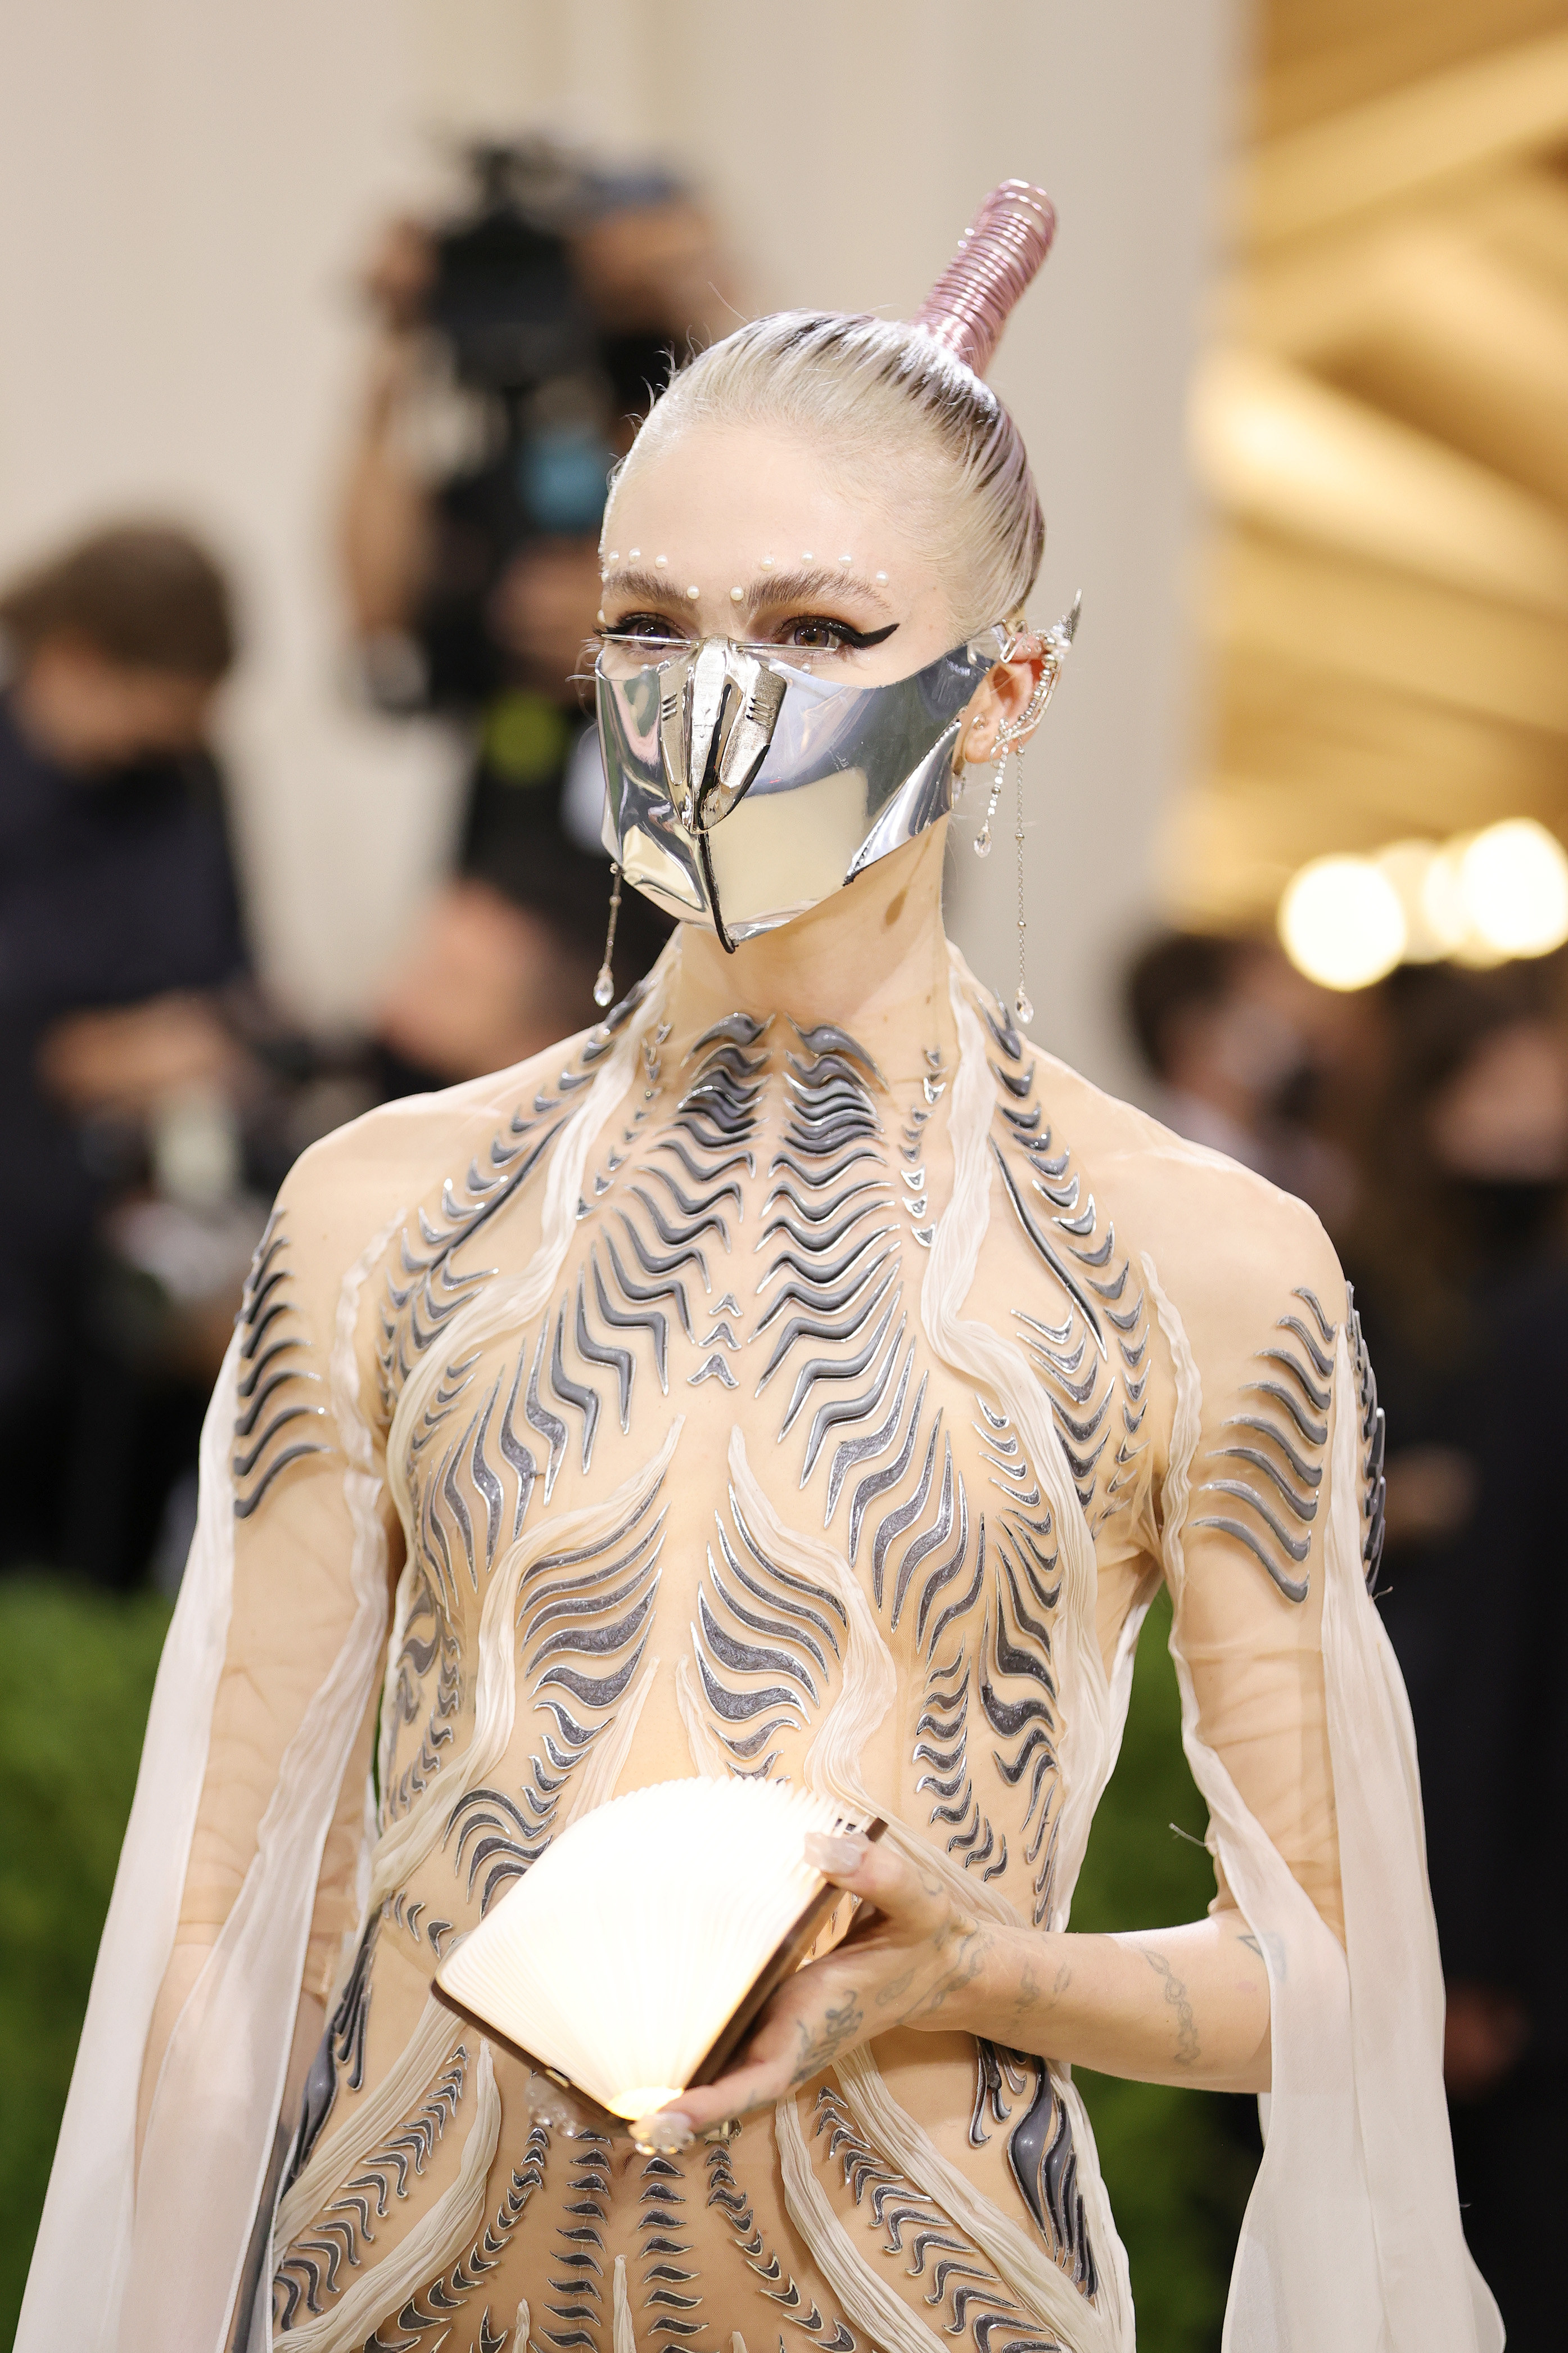 Grimes wear a metal face mask, and nude dress with lines detailing throughout